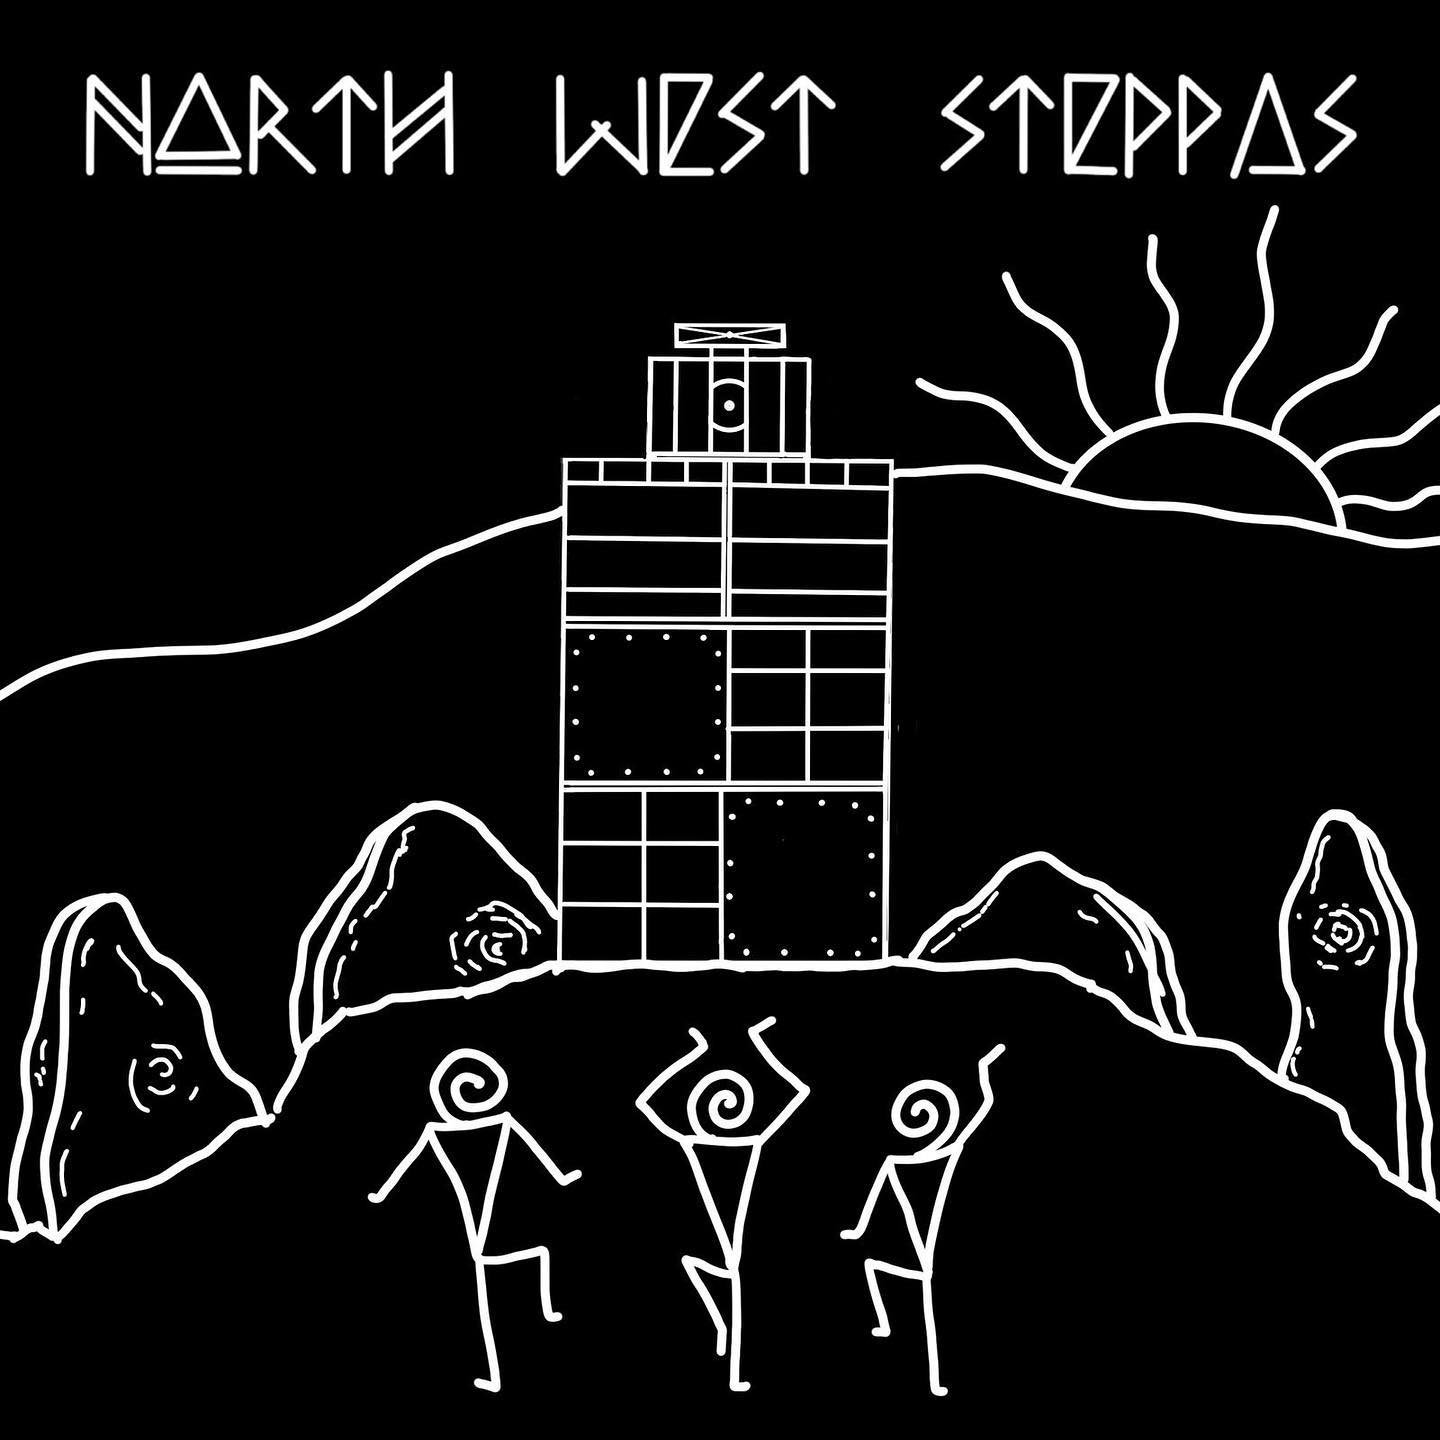 North West Steppas will be spinning the tunes this evening! They are bringing a mixture of Dub, Reggae, Steppas and more, providing the energy! 🌞

We have three rum based cocktails on the menu, so get down to enjoy some drinks and have a dance! 💃🏻